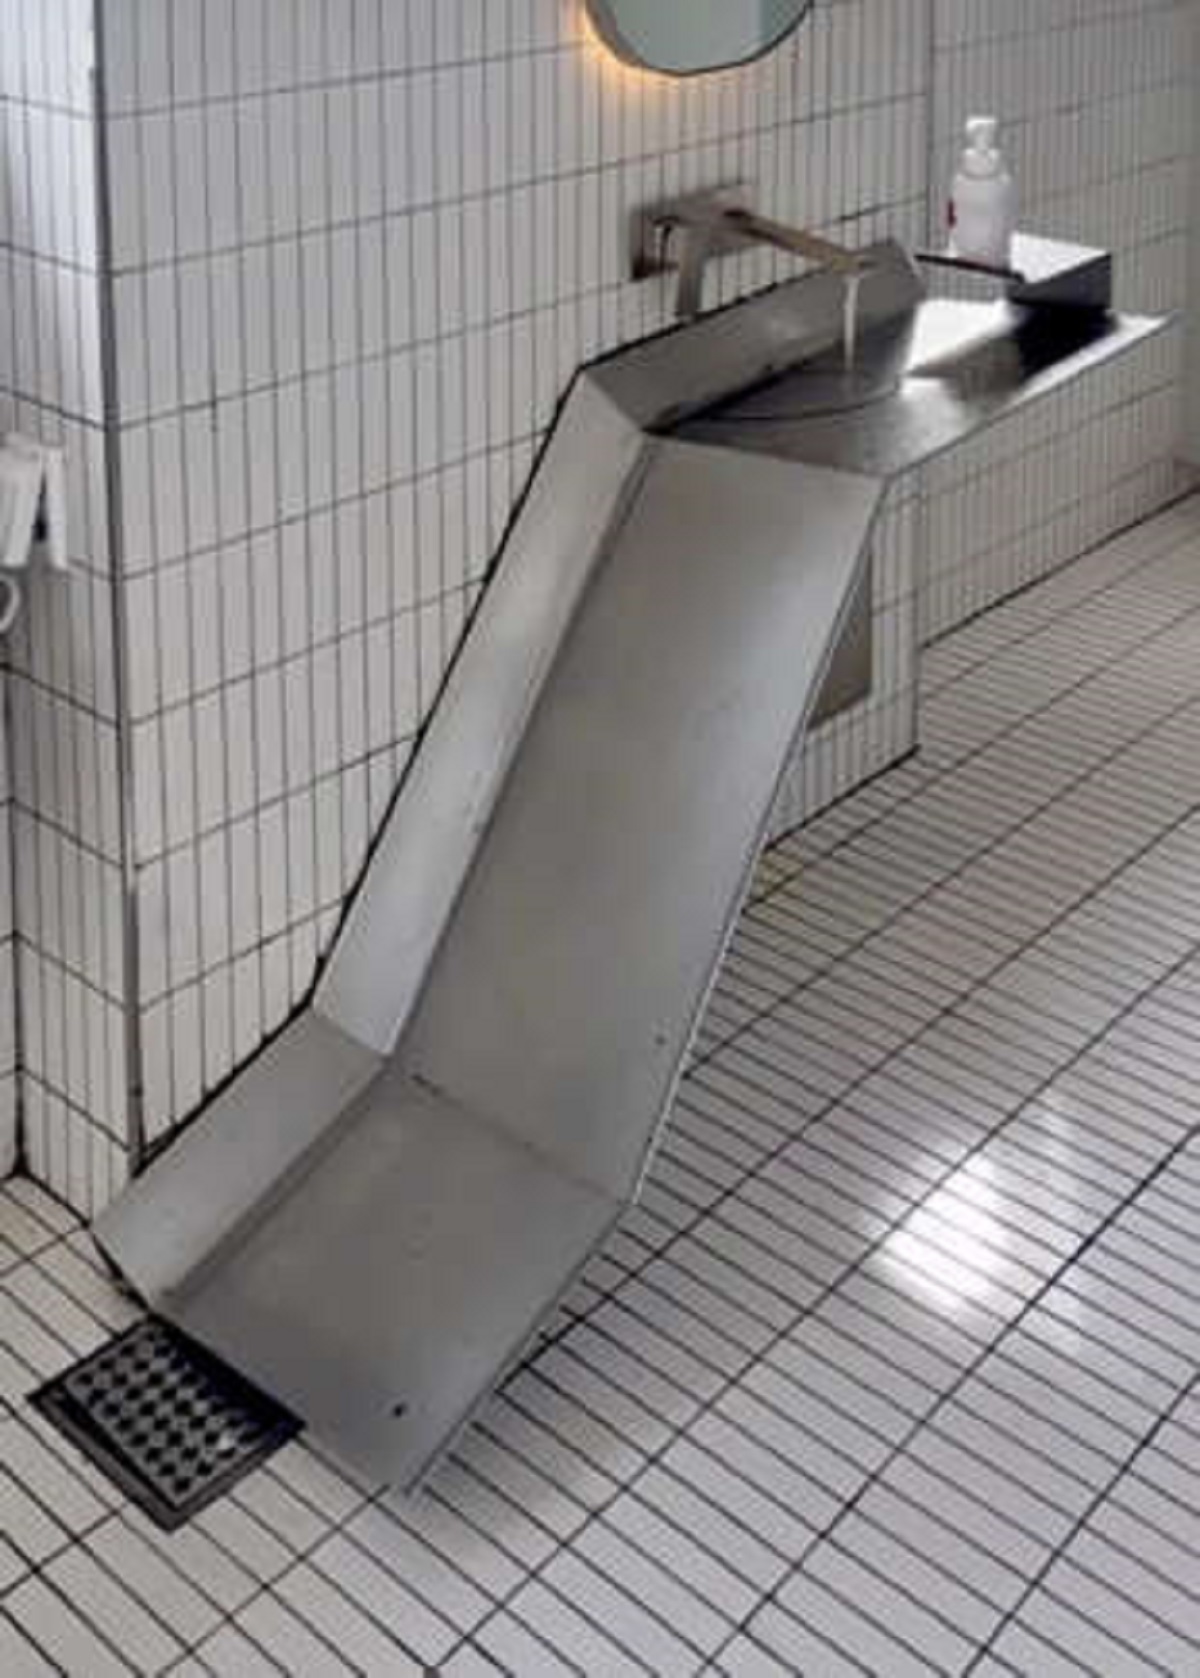 A sink drained to the floor? Sink for handwashing drains straight to the floor.